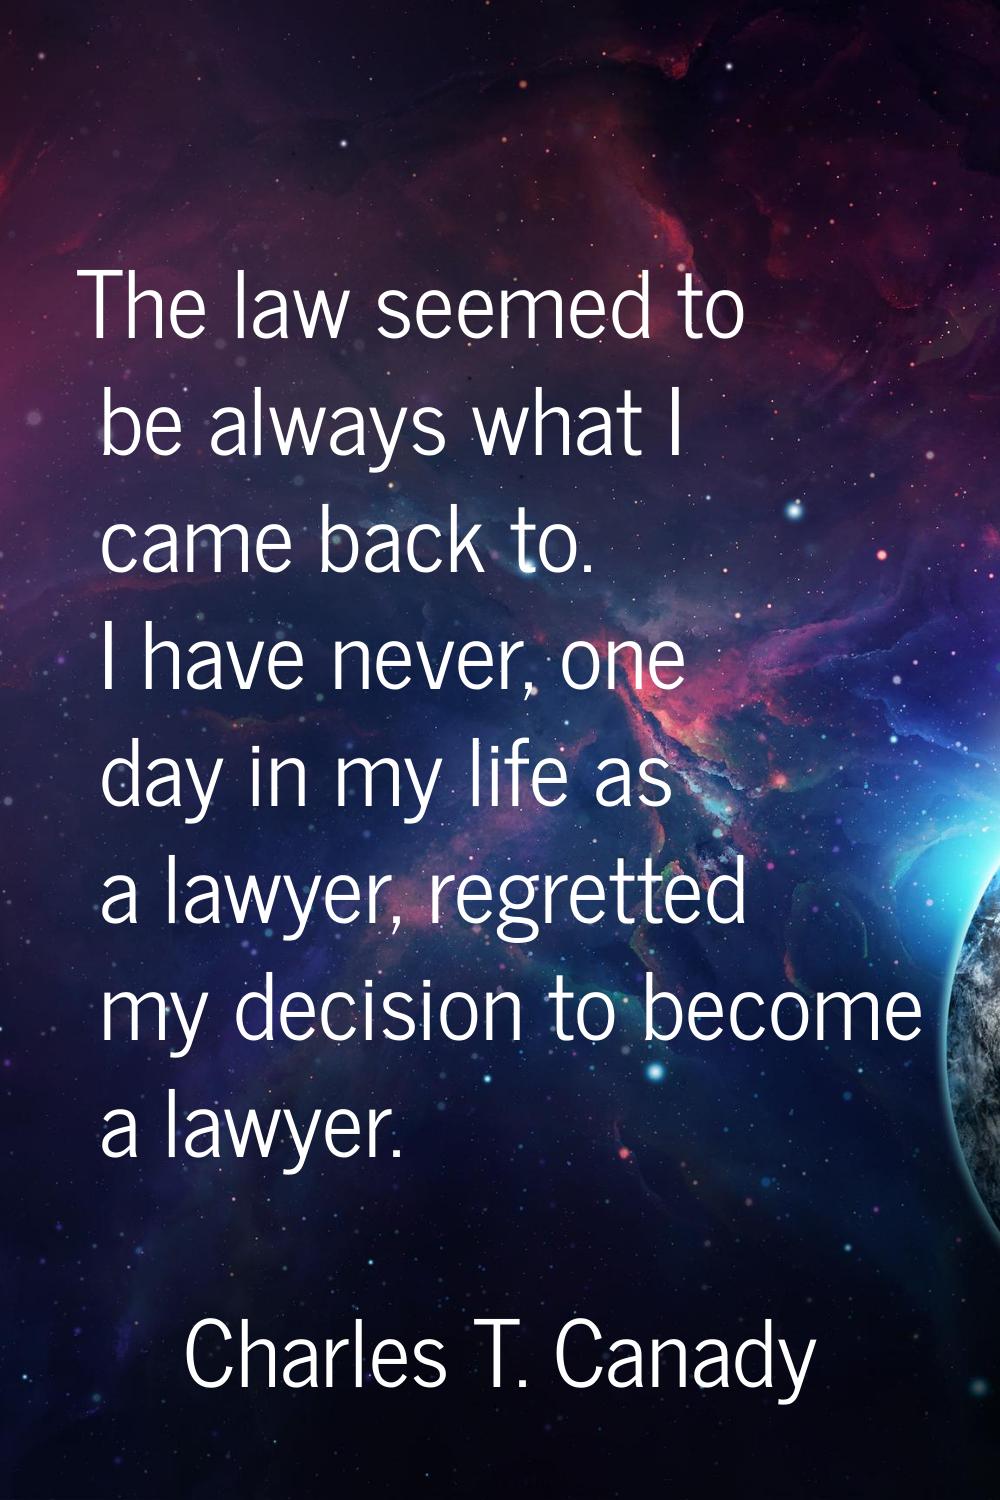 The law seemed to be always what I came back to. I have never, one day in my life as a lawyer, regr